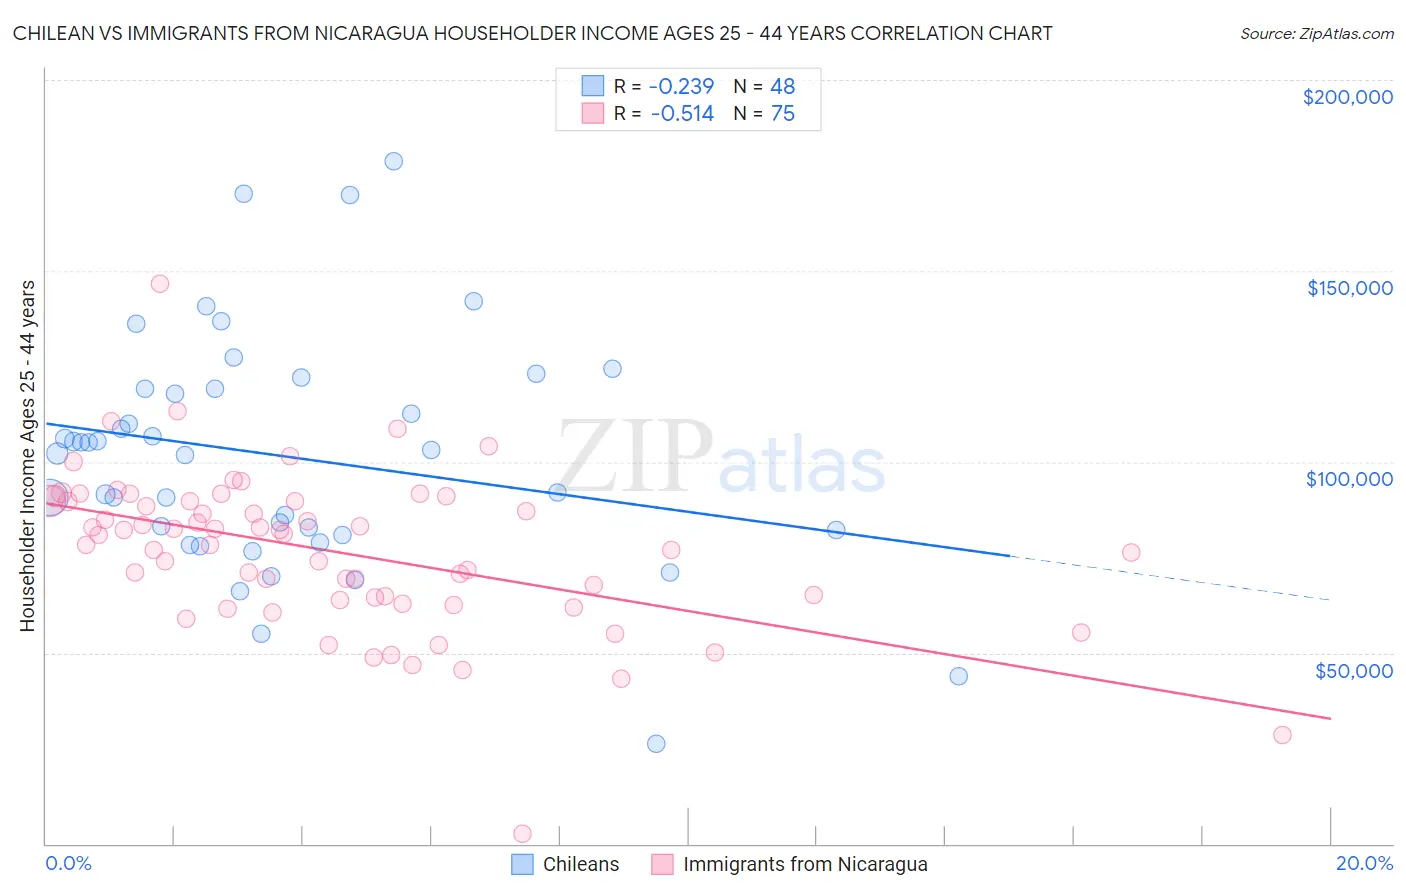 Chilean vs Immigrants from Nicaragua Householder Income Ages 25 - 44 years